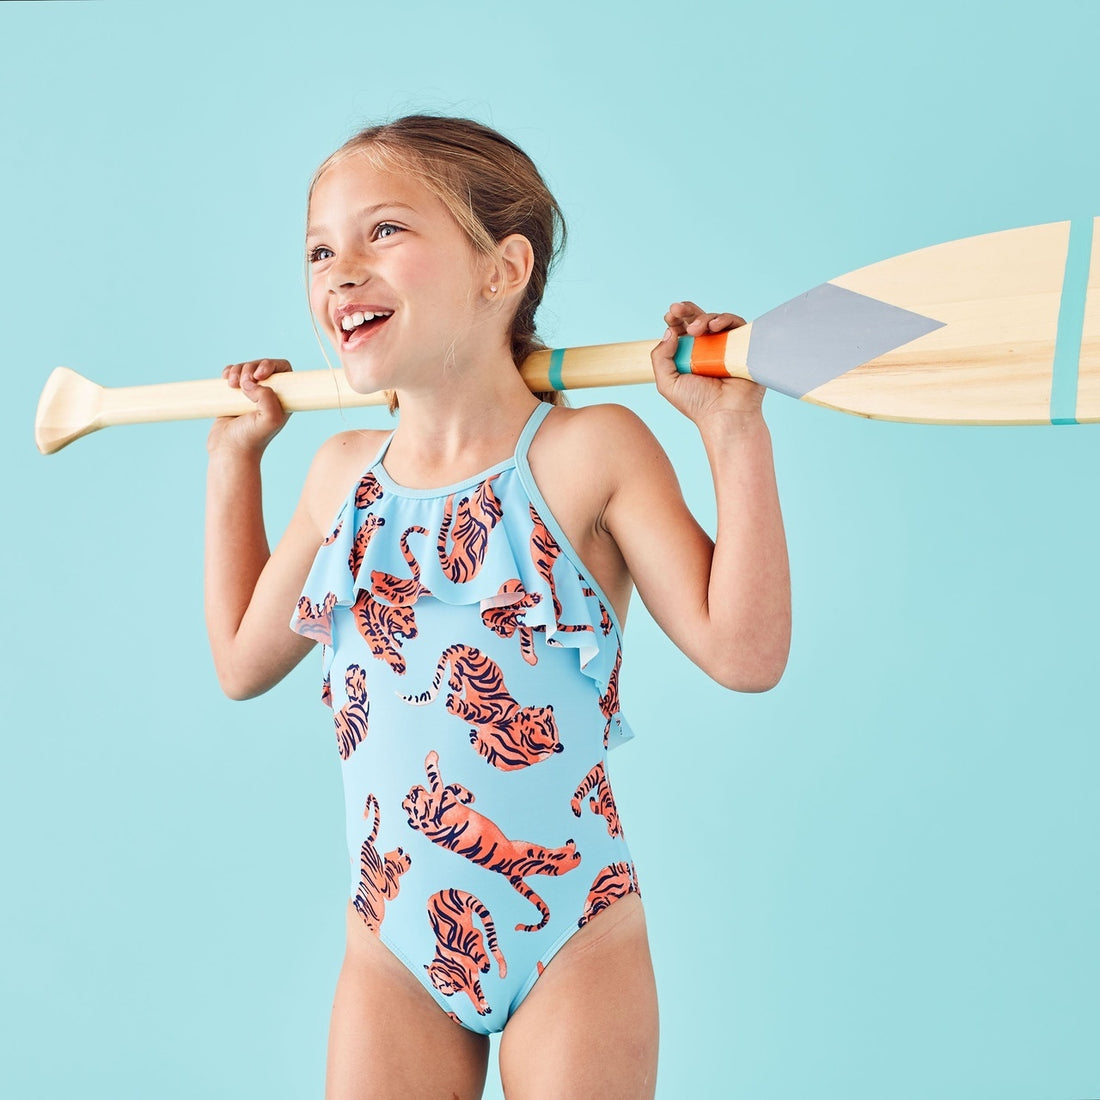 SAHM: 23 Things to Add to Your Summer Bucket List